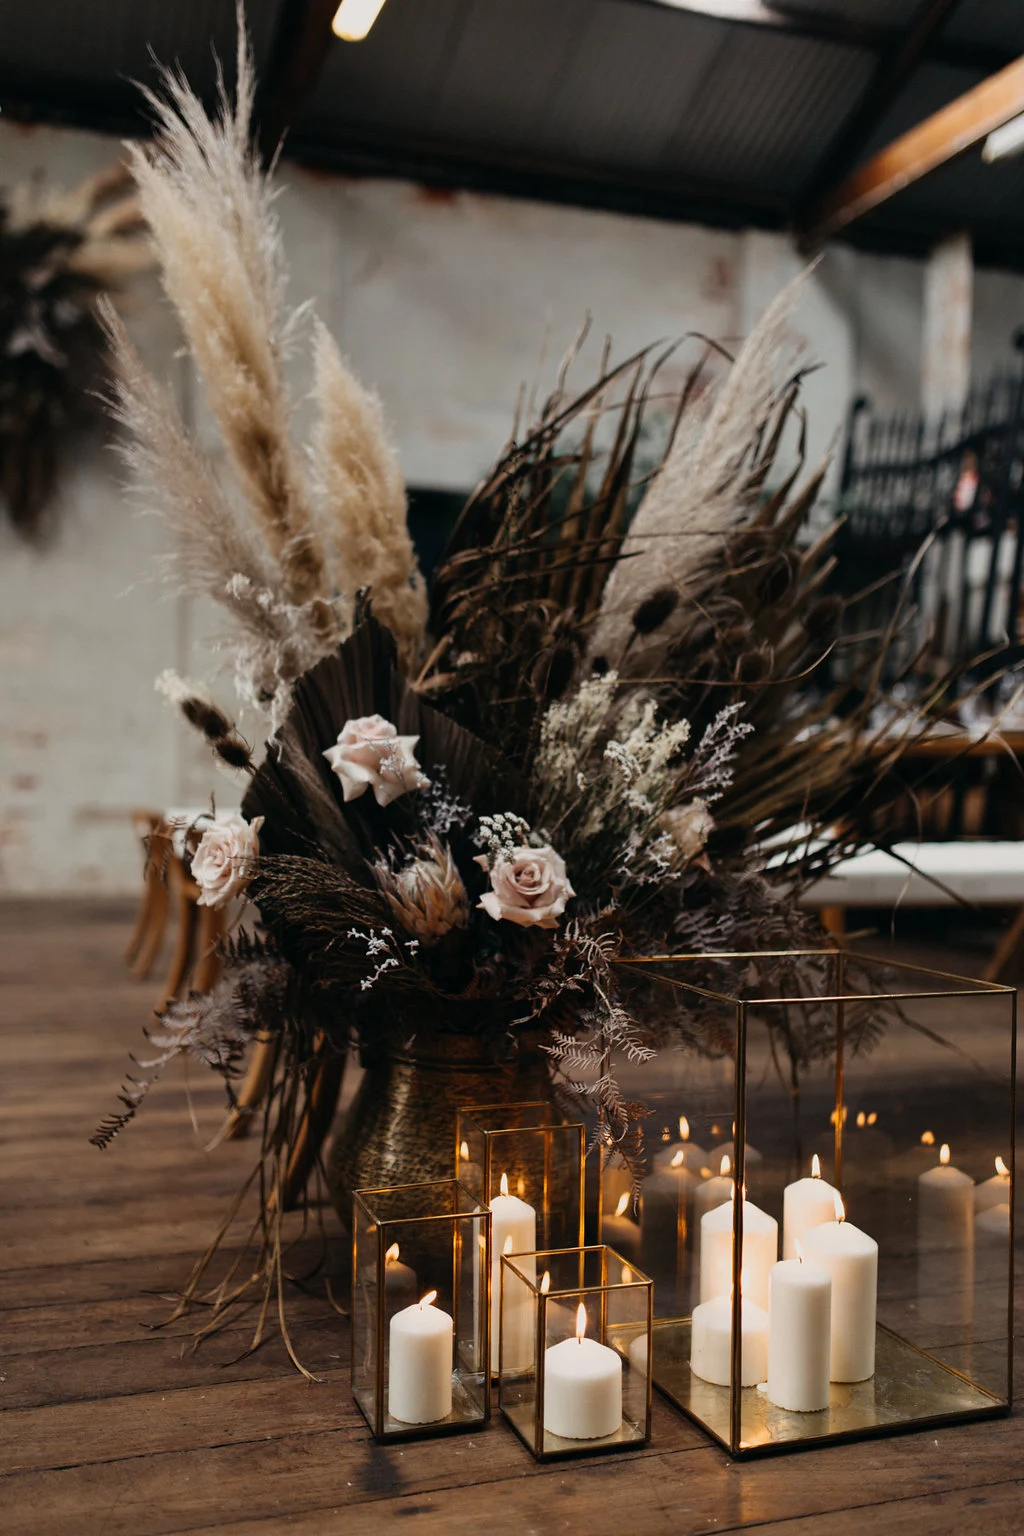 STYLED ECLECTIC WEDDING INSPIRATION SHOOT BOHO FLORALS IN THE WILDS OF SOMEPLACE ALBANY WA